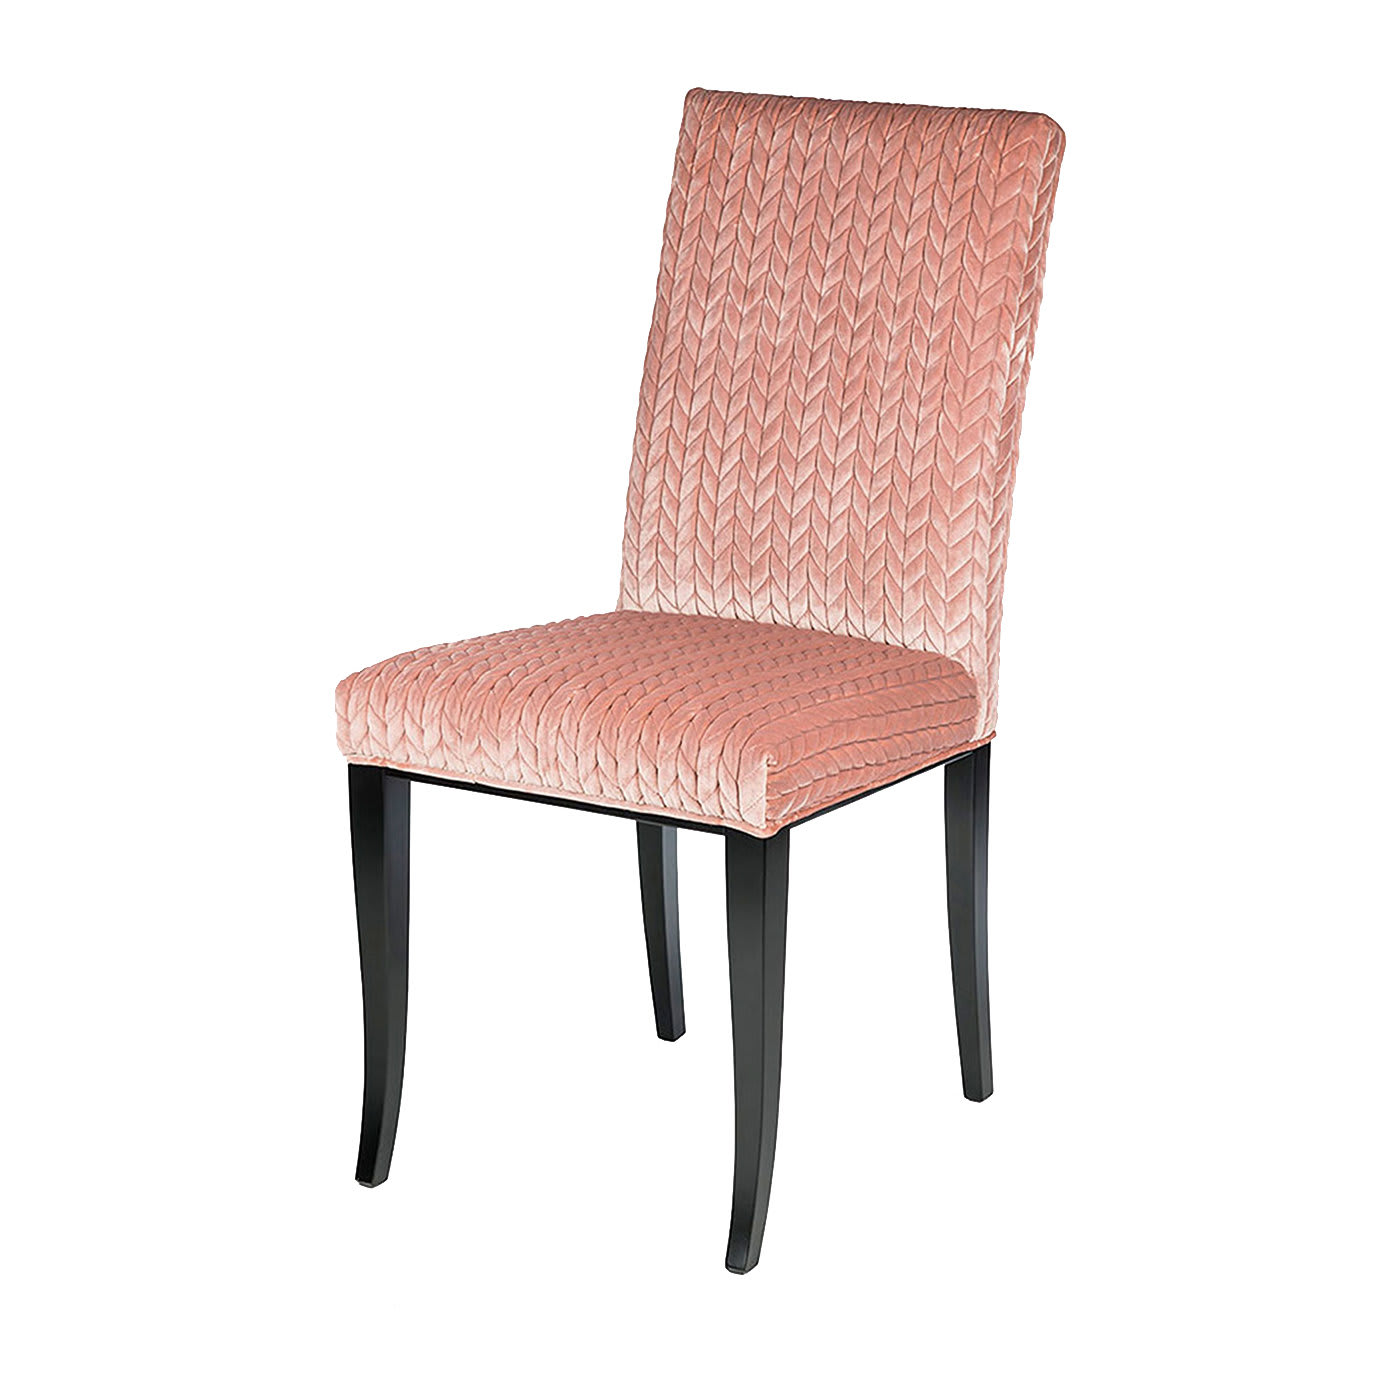 Set of Two Audrey Wood and Fabric Chairs - VGnewtrend